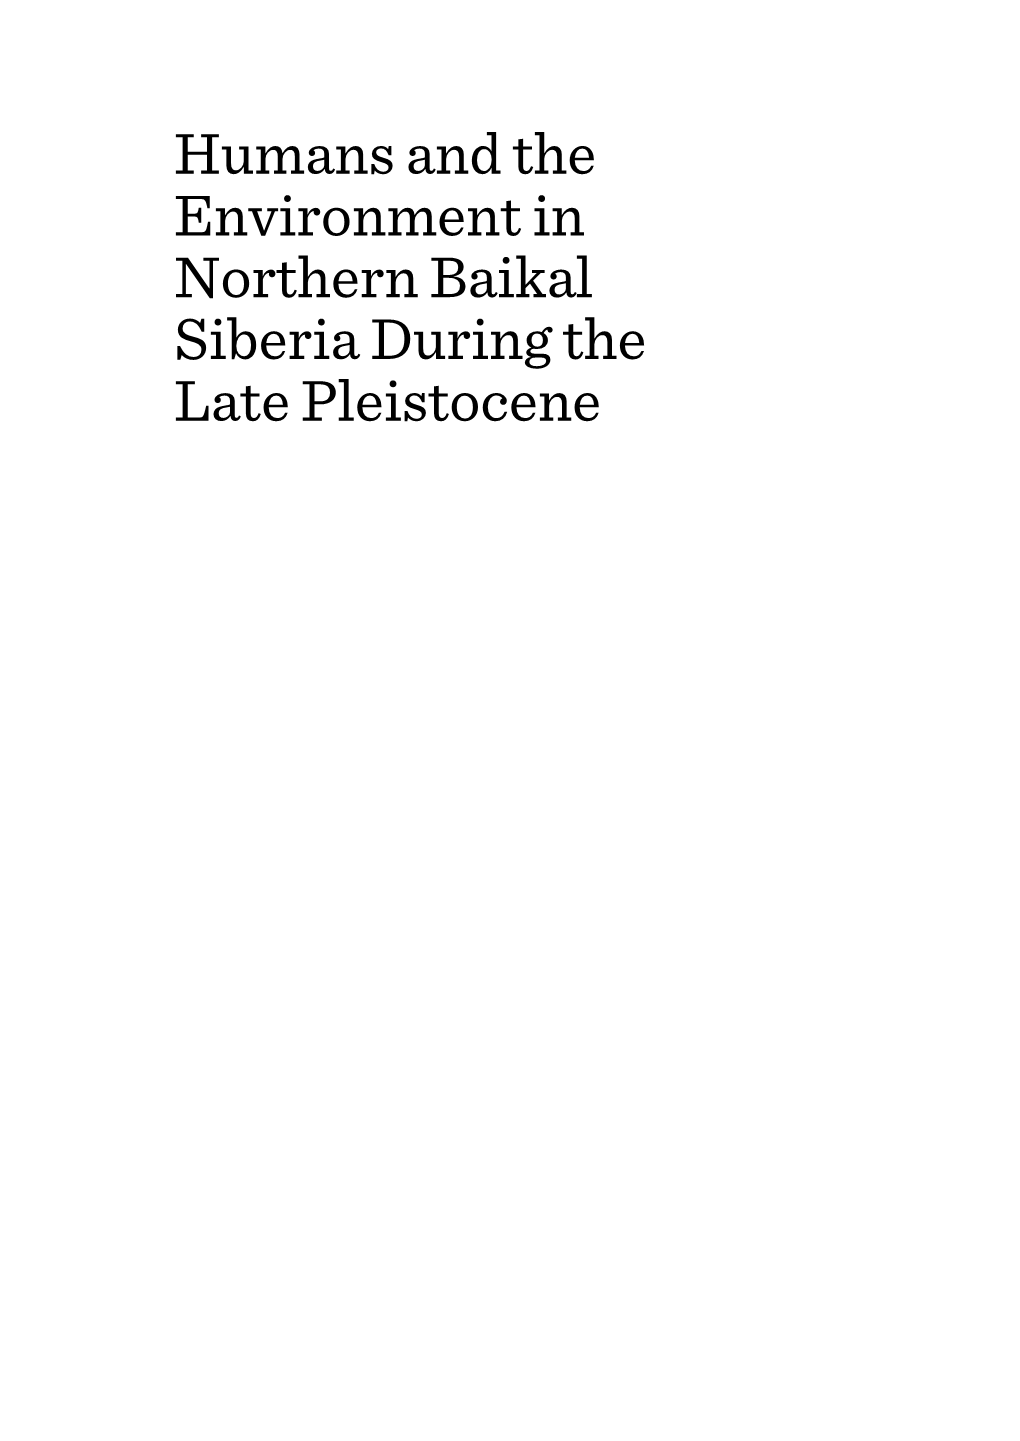 Humans and the Environment in Northern Baikal Siberia During the Late Pleistocene